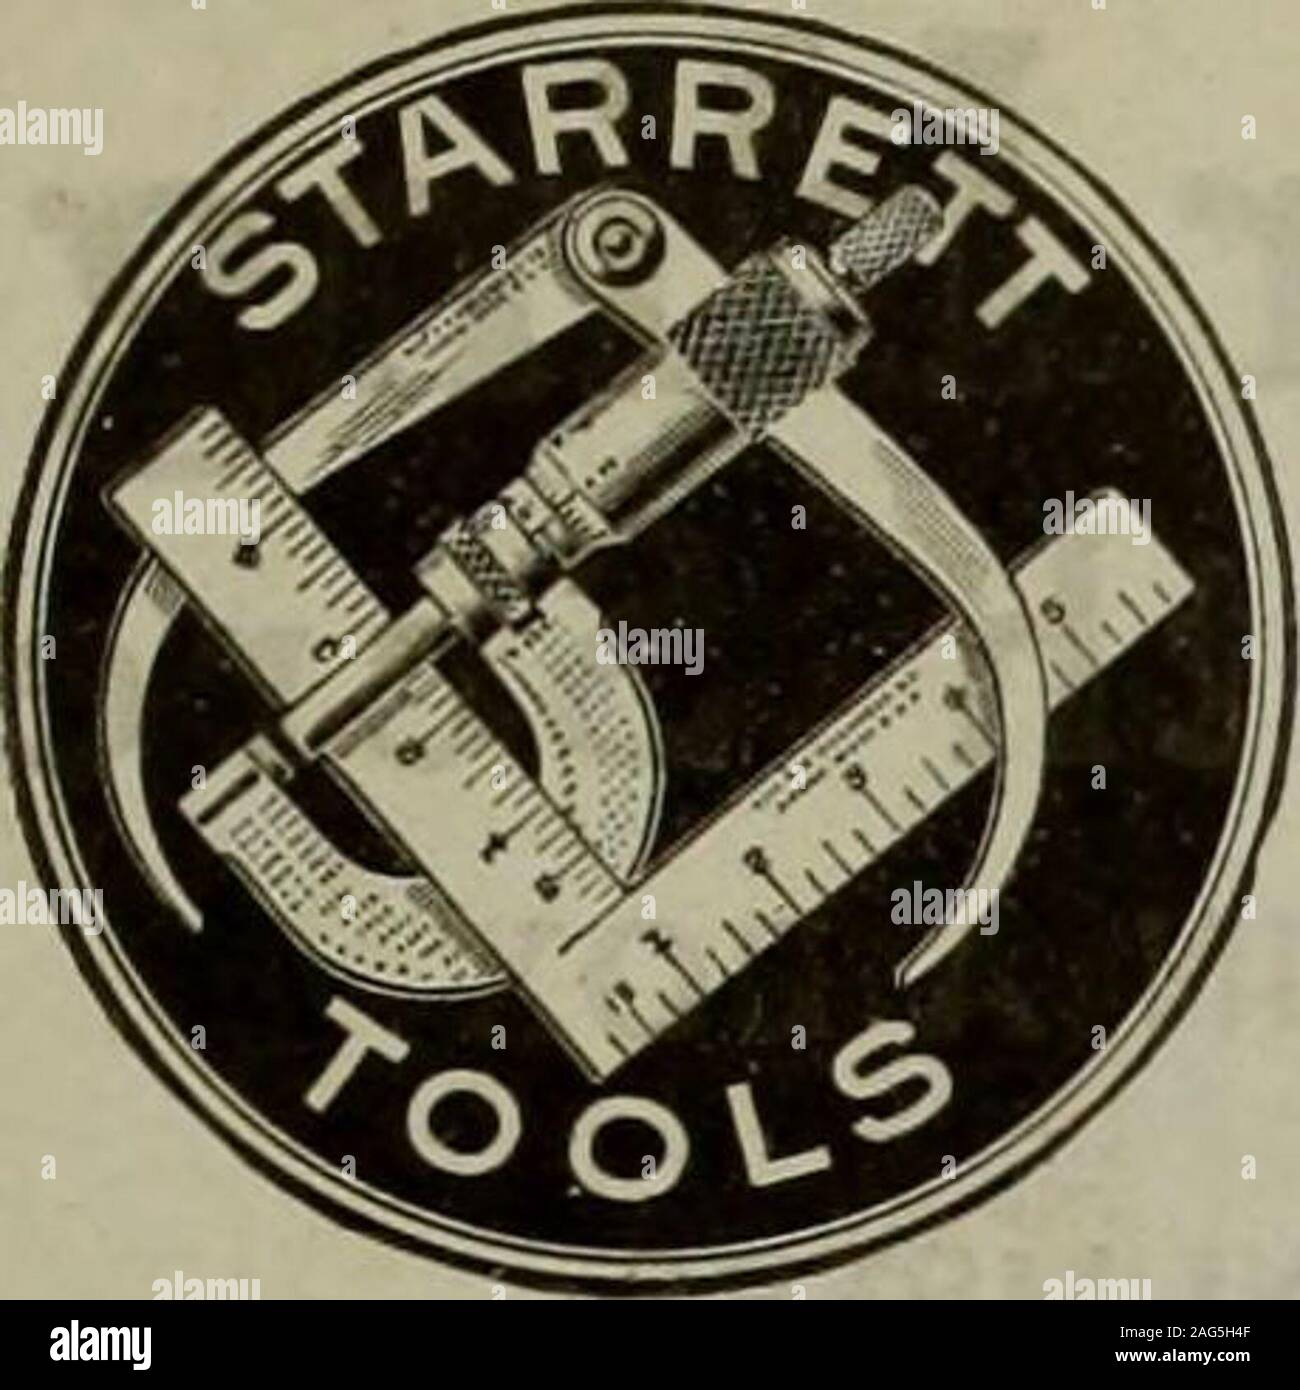 . Hardware merchandising March-June 1917. Qts.—4y2, 6, 8y2, ny2 // interested, tear out this page and keep with letters to be answered. June 9, 1917. H AKDWARE AND MET A .. The L. S. Starrett Co. The Worlds GreatestToolmakers Athol, Mass. ?ttUHlHIlHHlftilllllllHlllltllflflllllllllllfllllllflilll HERE is the most useful measur-ing instrument which machinistsneed in laying out their work. Itis an easy tool to sell because of thecomplicated layouts which are constant-ly arising nowadays in metal manufac-turing. Because of its variety of uses, mosttool-makers and machinists want the -Starrett Sur Stock Photo